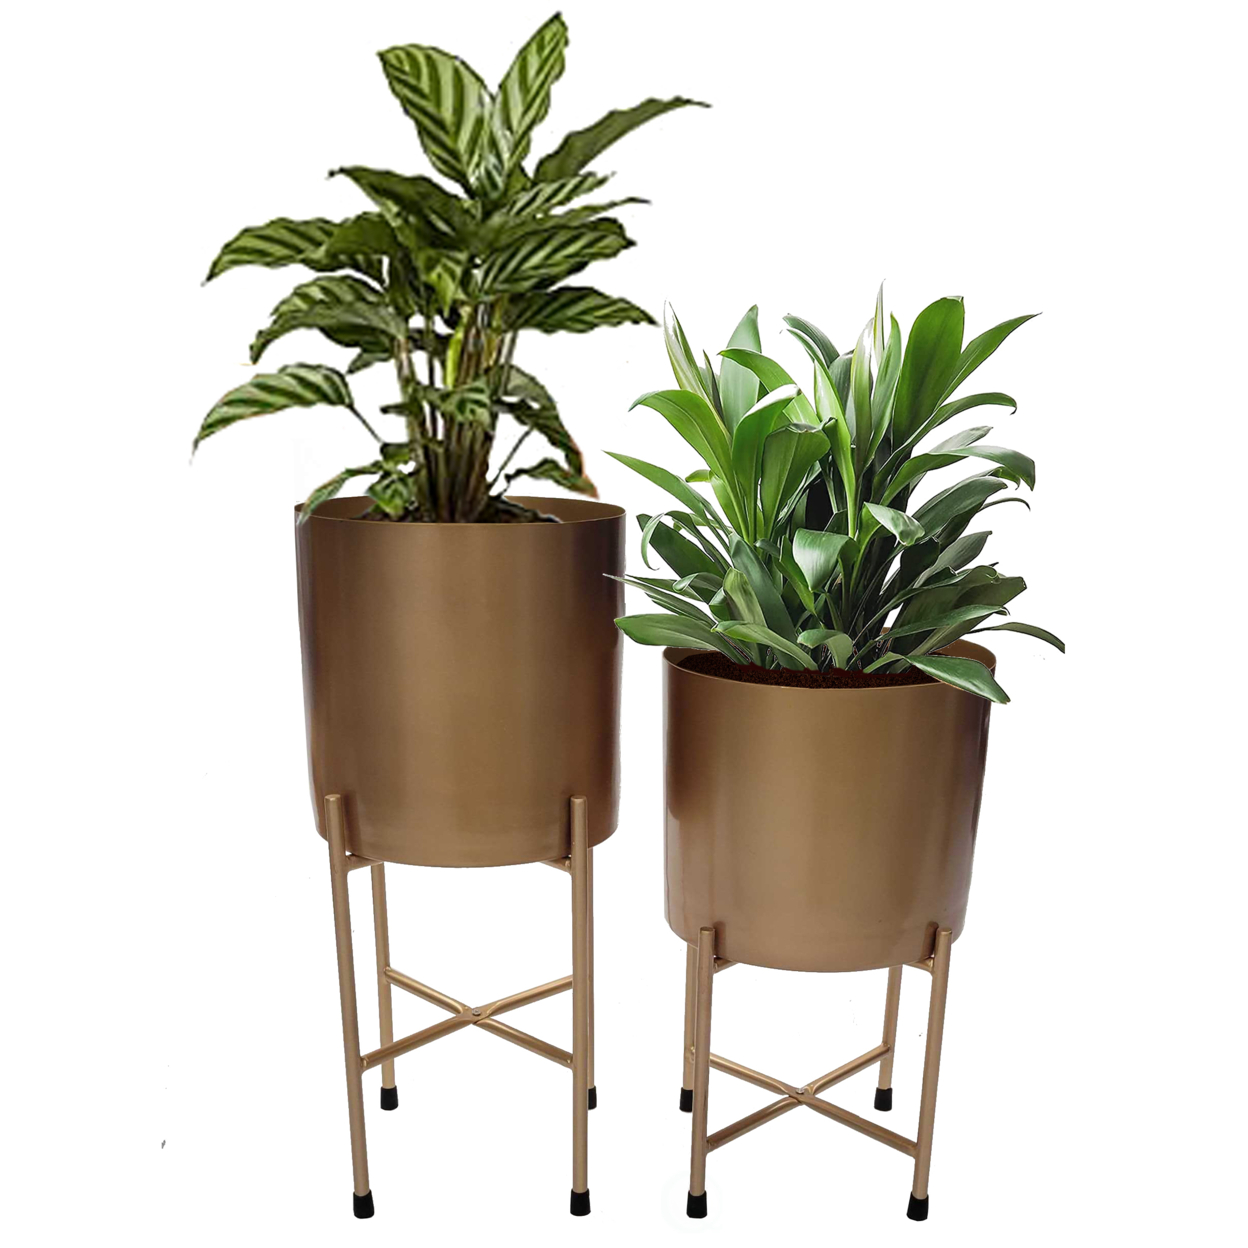 Tall Metal Floor Flower Planter Holder With Stand, Modern Decorative Floor Flower Holder, Perfect For Your Entryway, Living Room - Gold